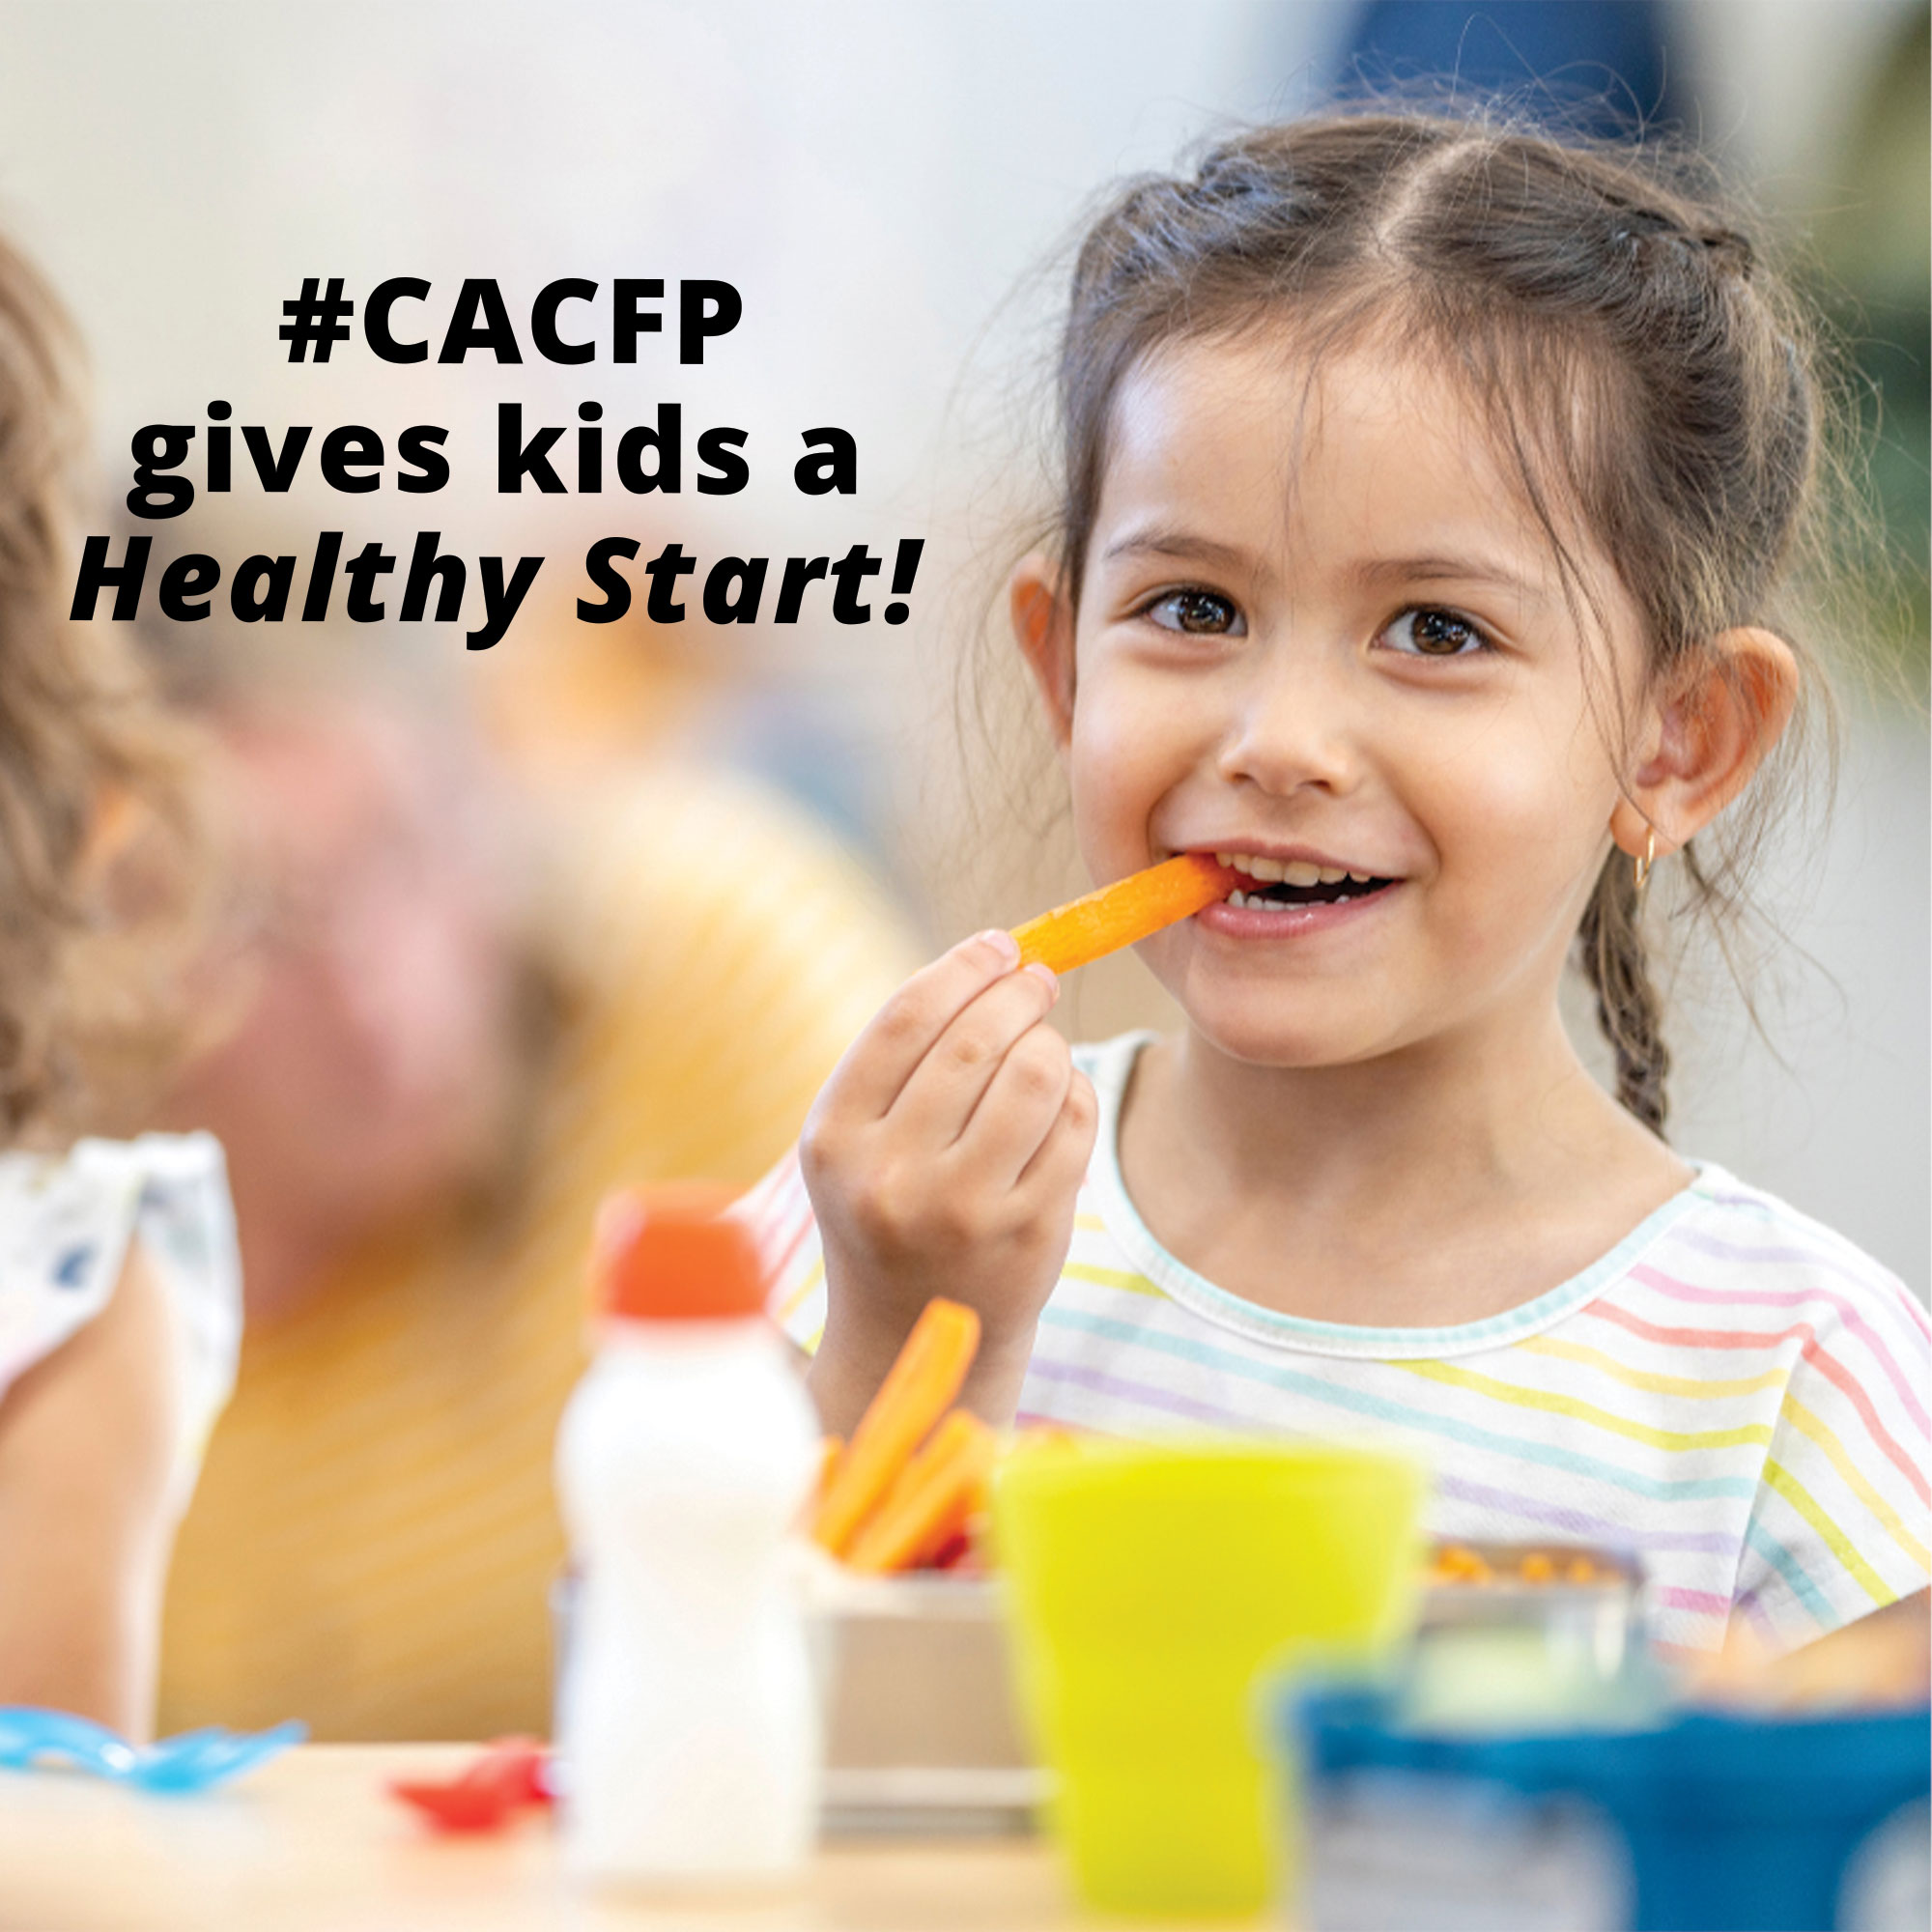 A-Healthy-Start-cacfp.org